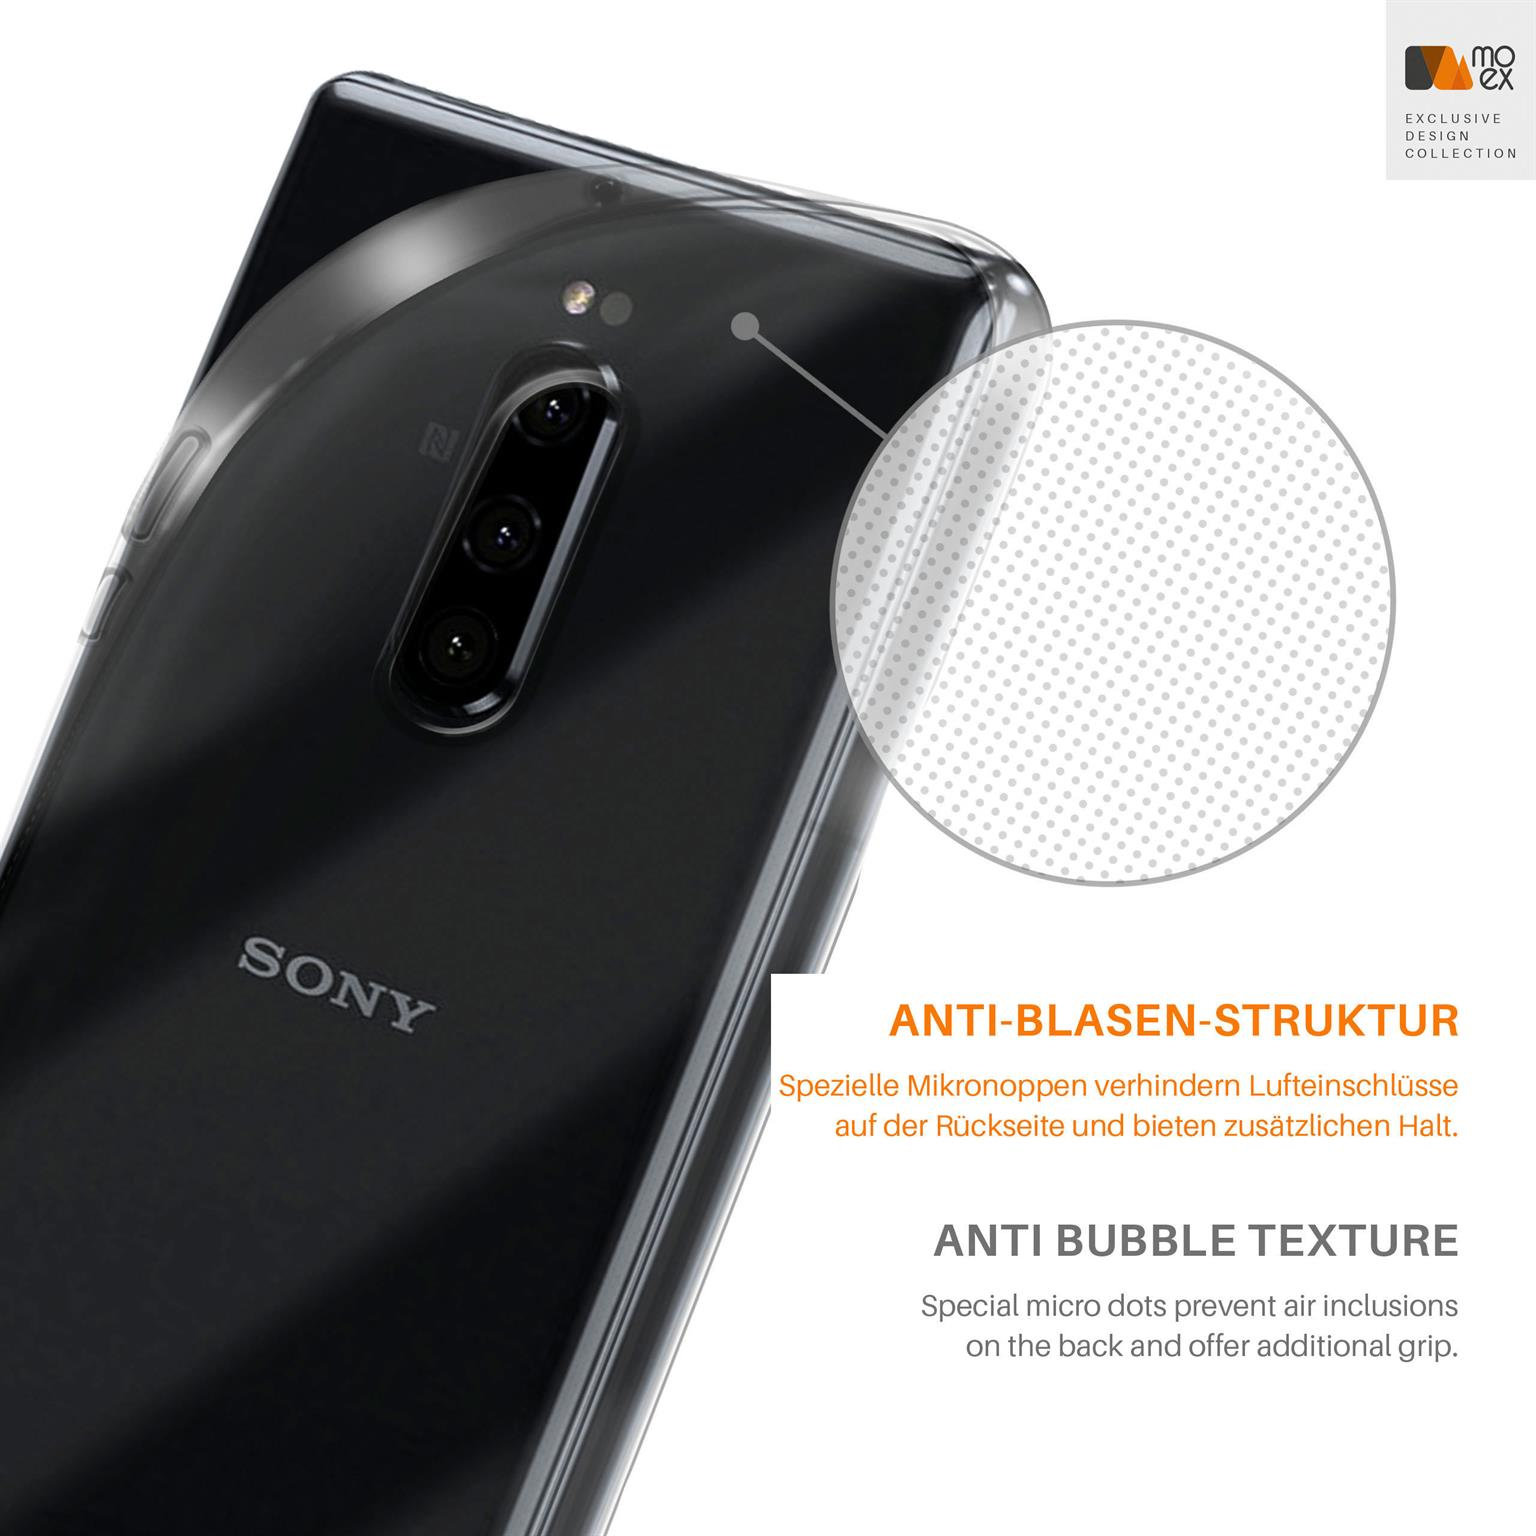 Xperia Crystal-Clear Aero 1, Case, Backcover, Sony, MOEX